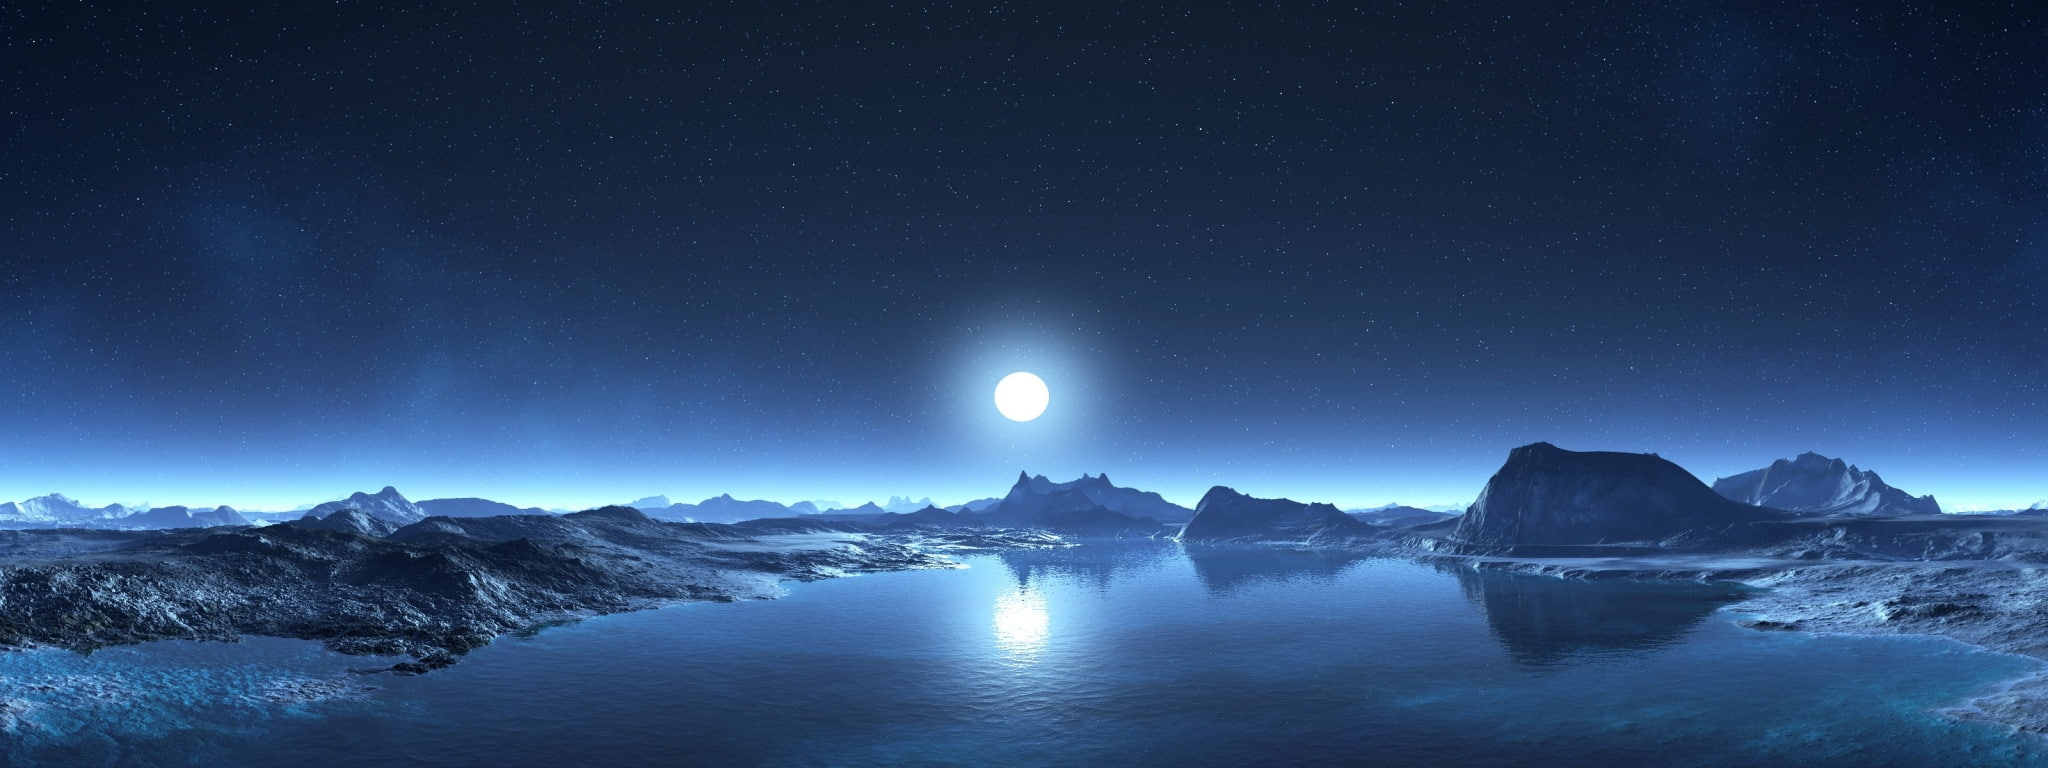 dual screen backgrounds images, night, sky, moon, snow, water